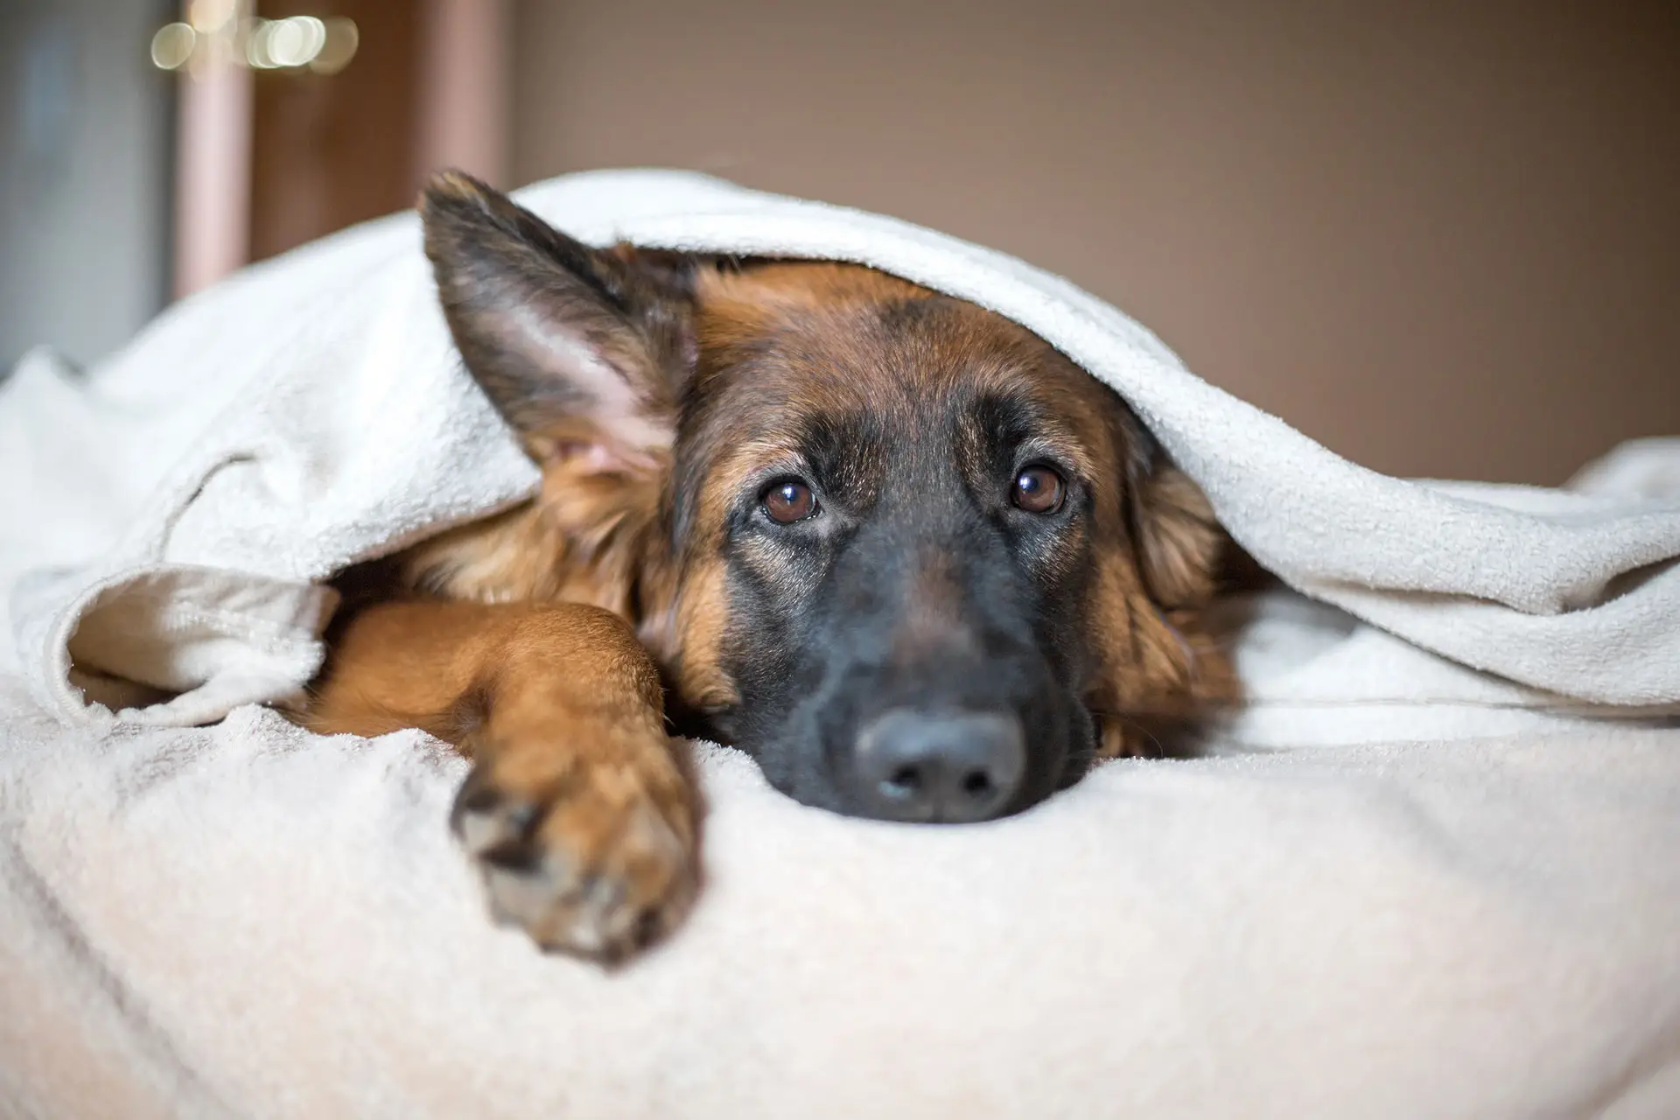 Sad looking dog in bed under a blanket